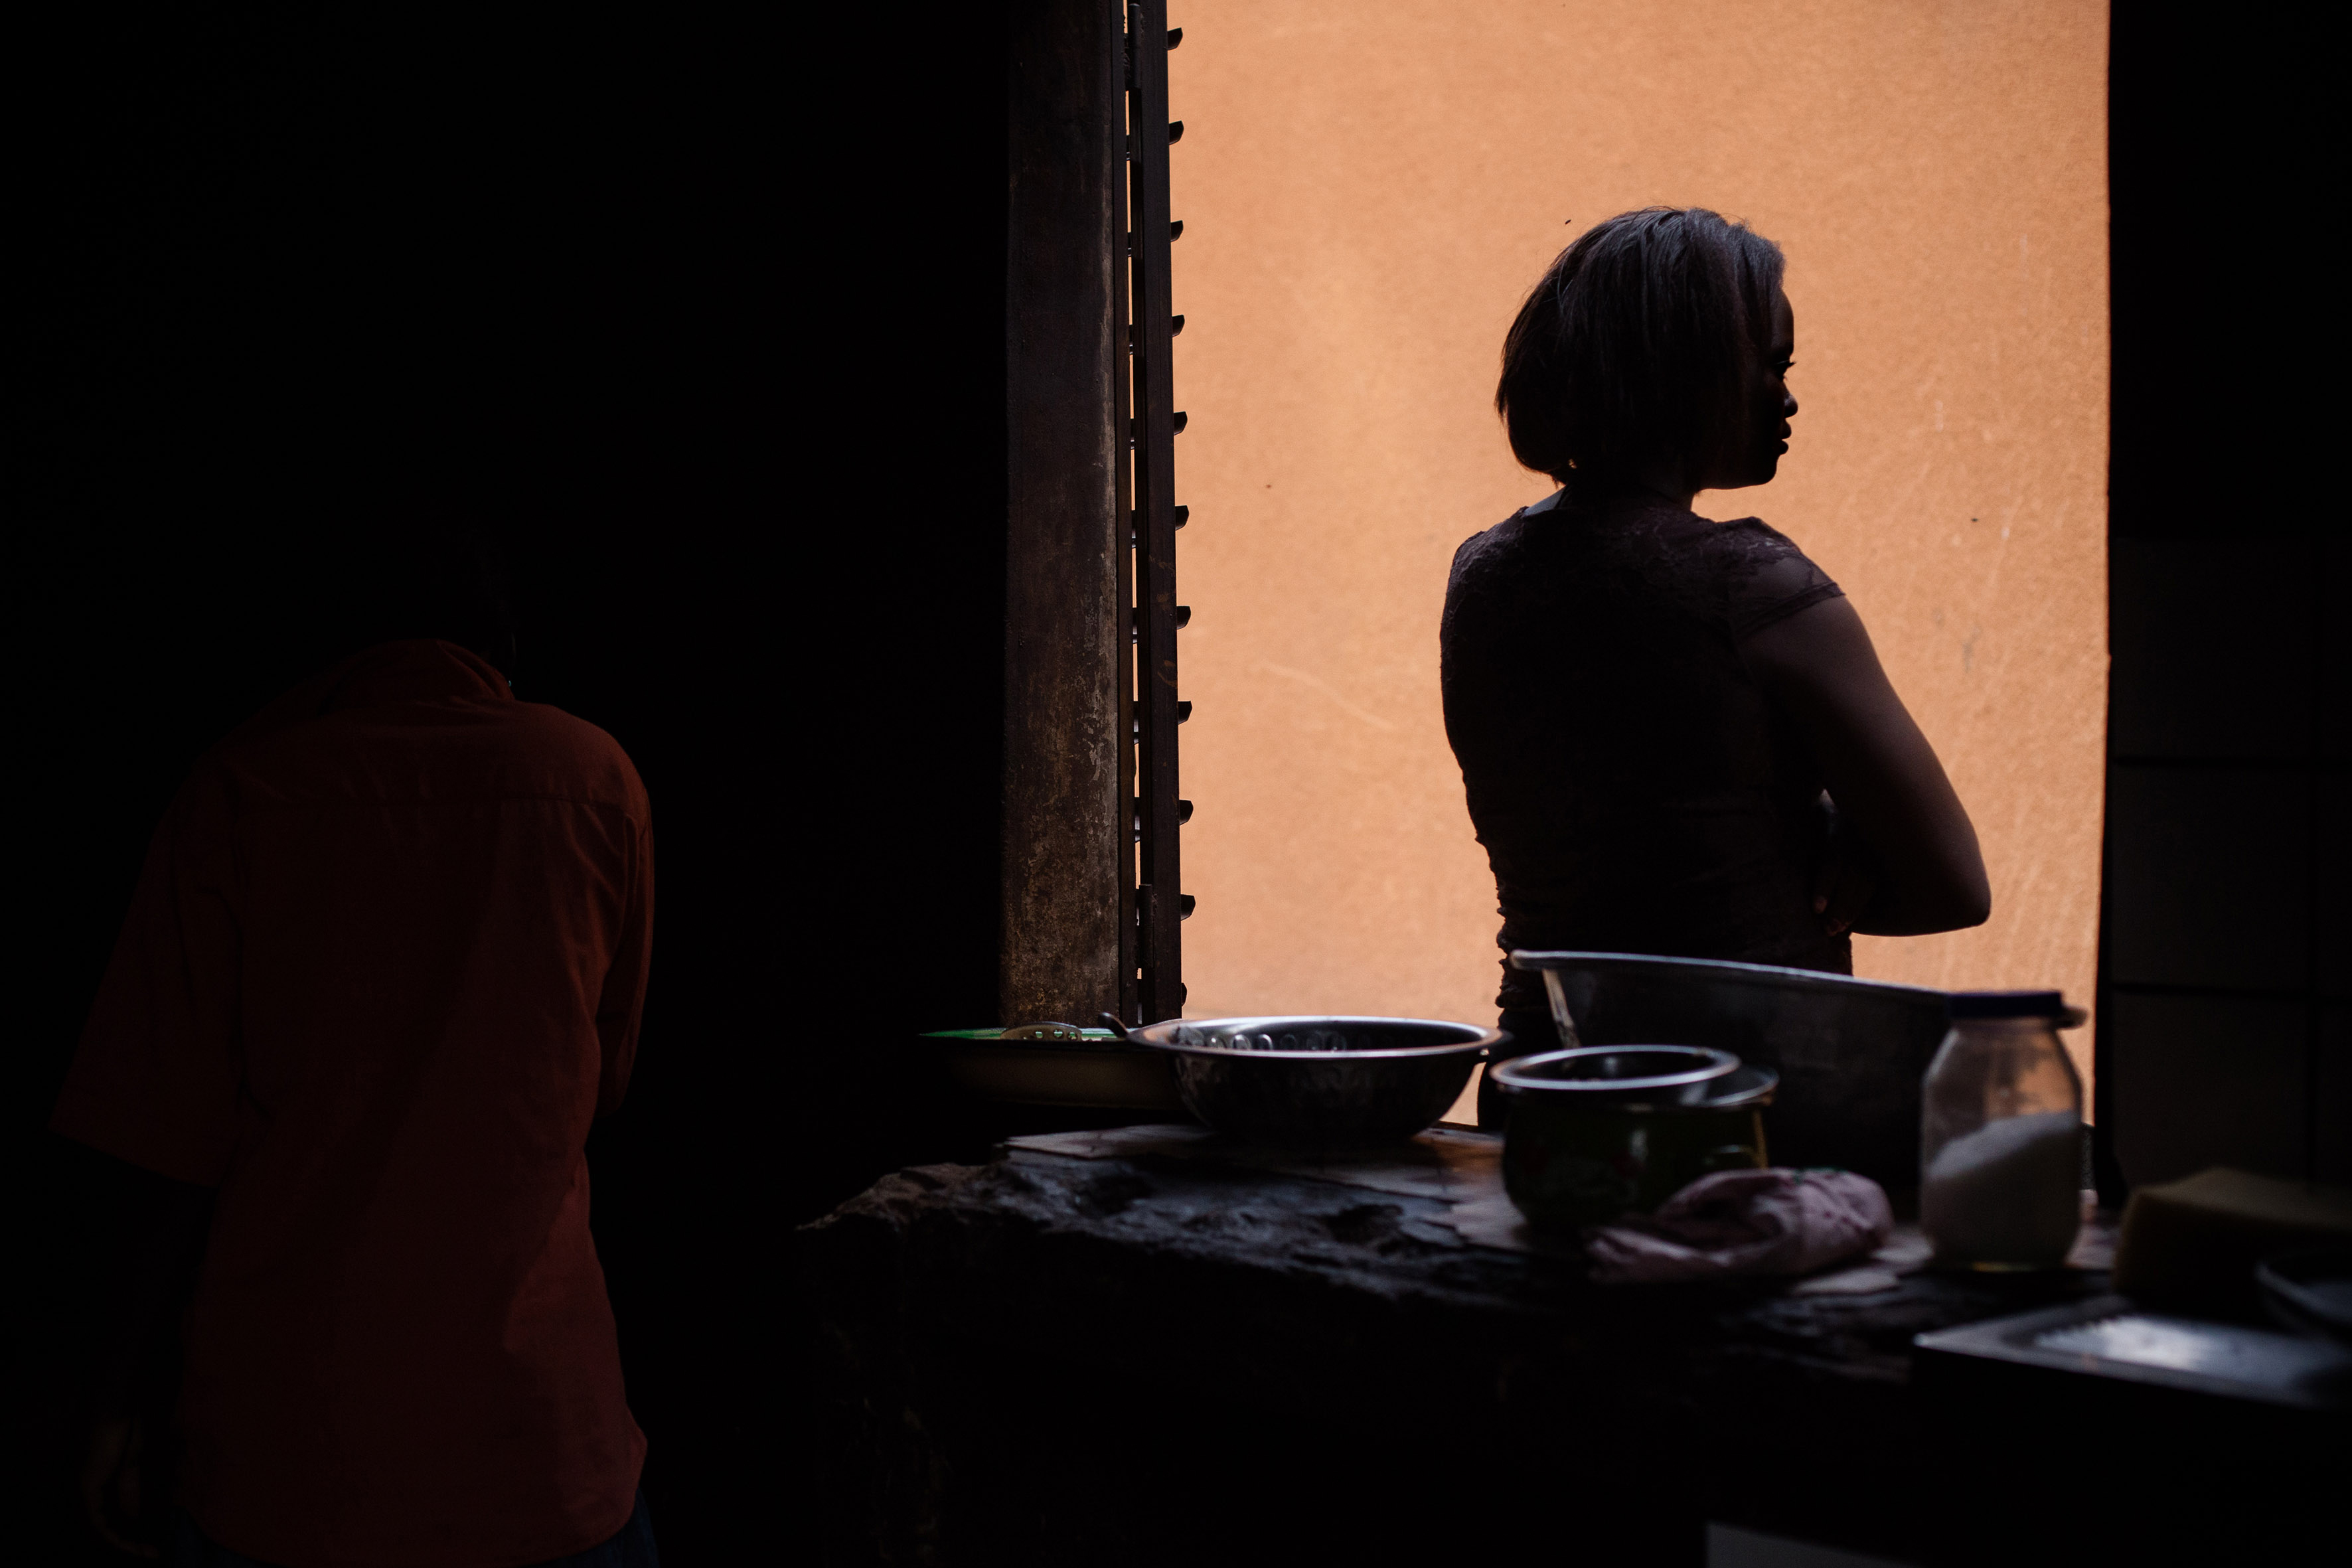 Foceb (Fondation Cardinale Emile Biyenda) provides refuge to survivors of rape, early and forced marriage and unwanted pregnancy in central Ouagadougou, capital of Burkina Faso.